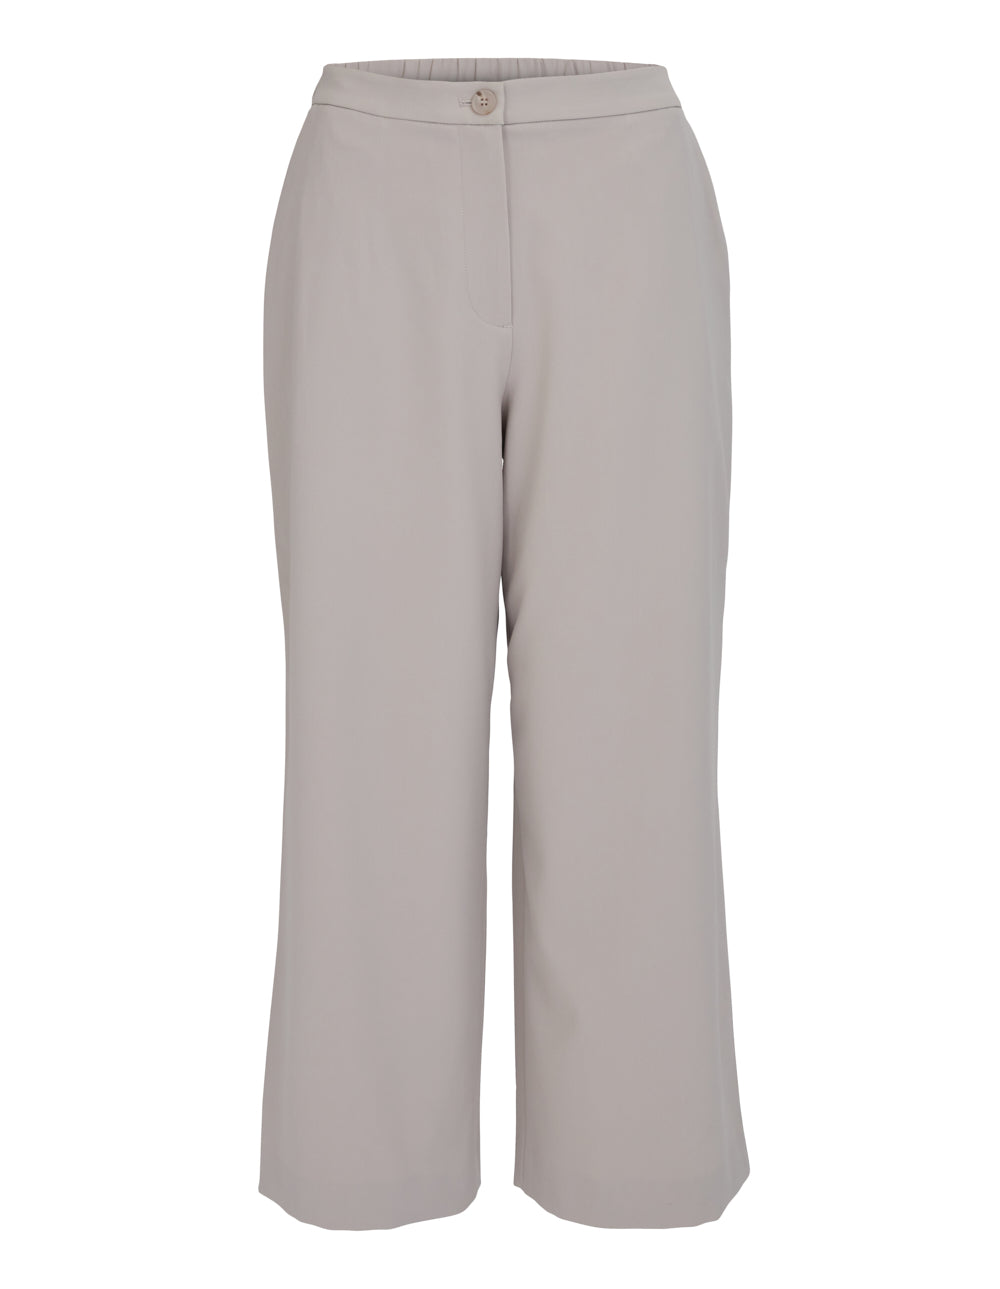 Easy-Care-Poly-Stretch-Elastic-Pants-Nude-01